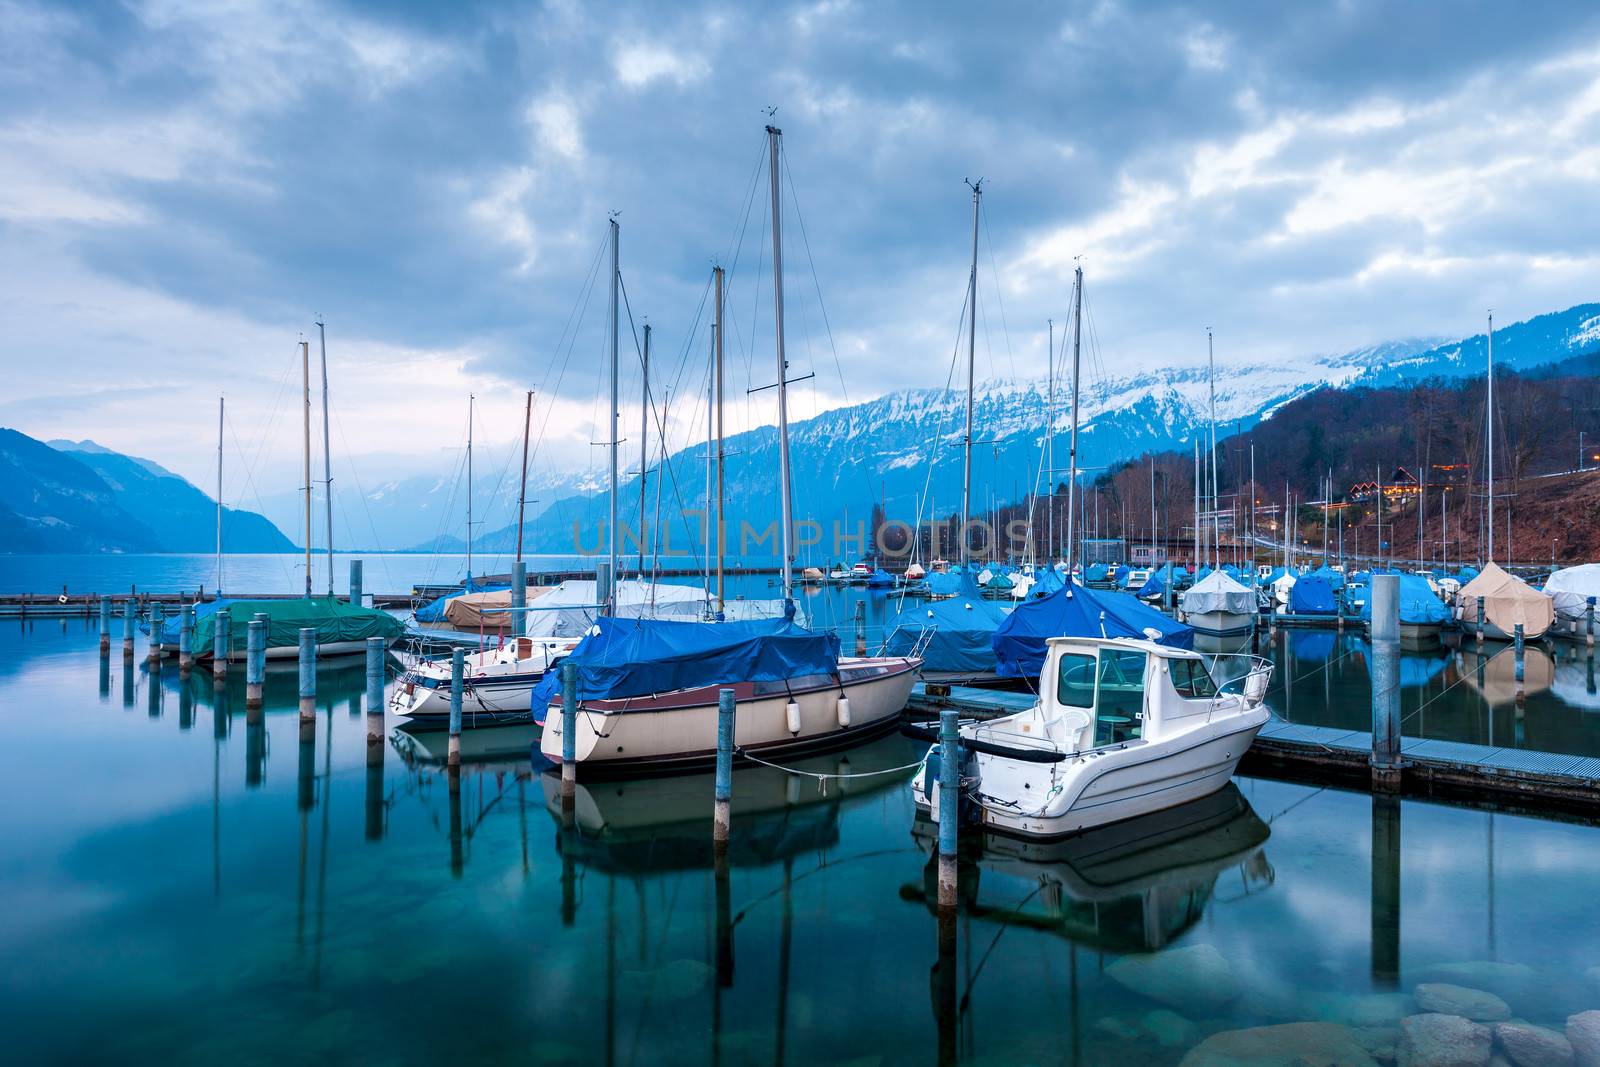  	Yachts and boats on Lake Thun in the Bernese Oberland, Switzer by vladimir_sklyarov